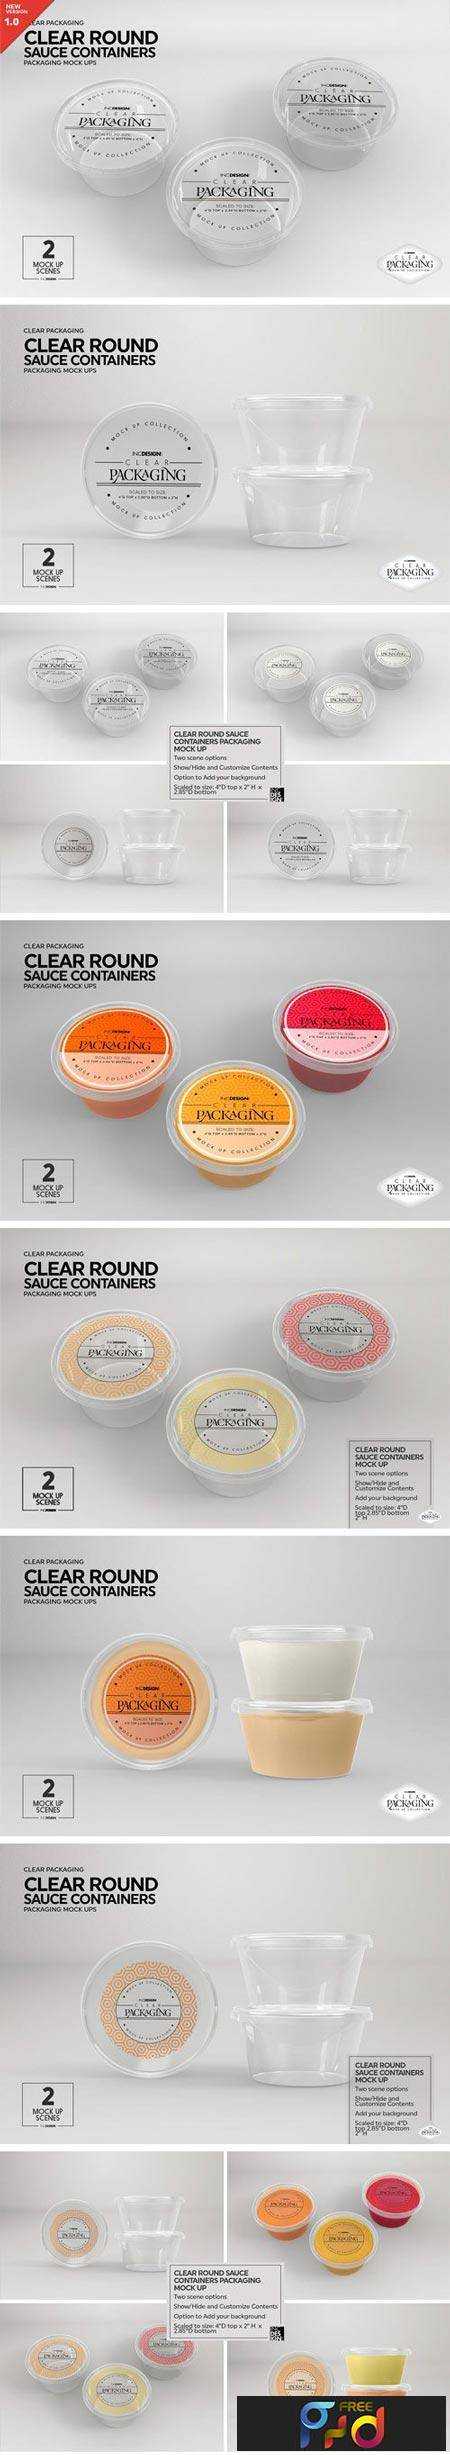 FreePsdVn.com 1801279 MOCKUP clear round sauce containers mockup 2221803